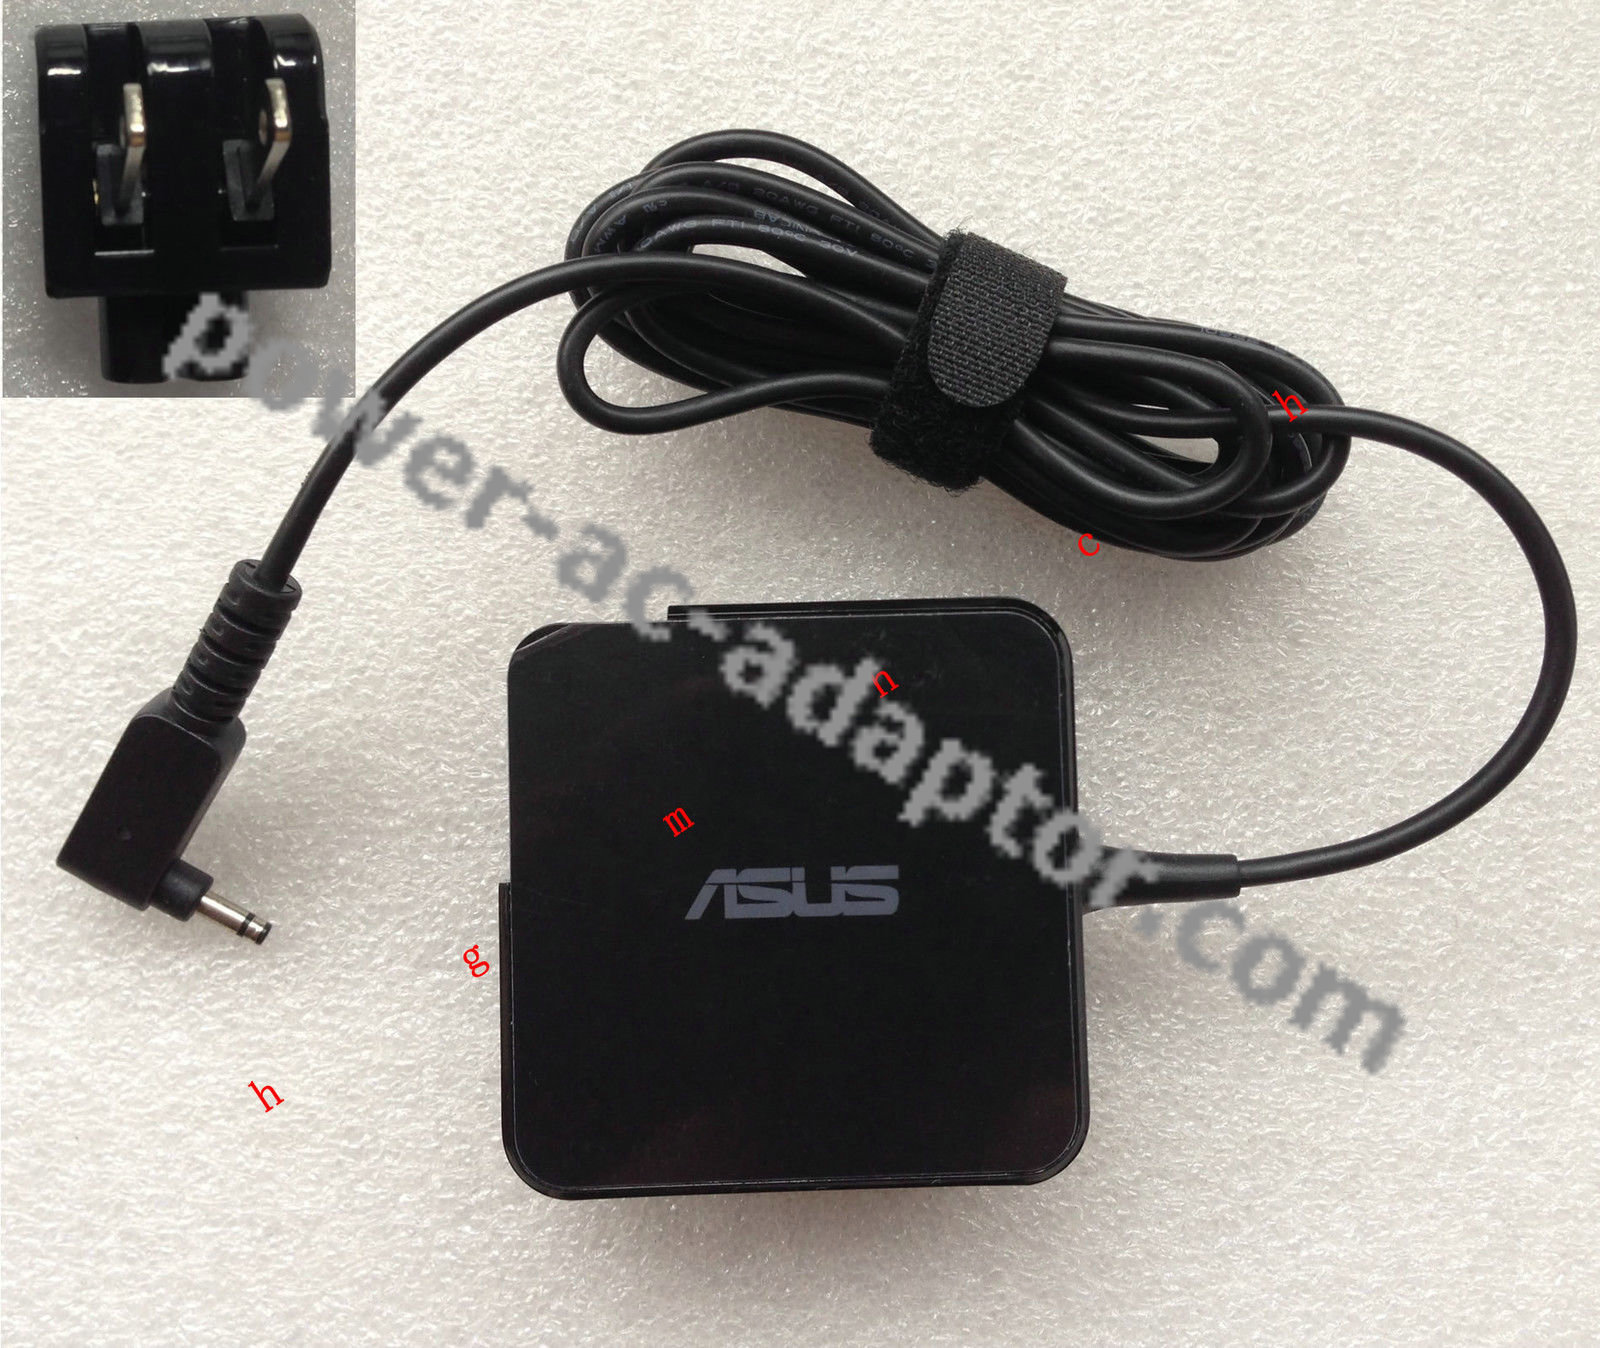 OEM ASUS 45W AC Adapter for ASUS Zenbook UX31E-DH72 Ultrabook